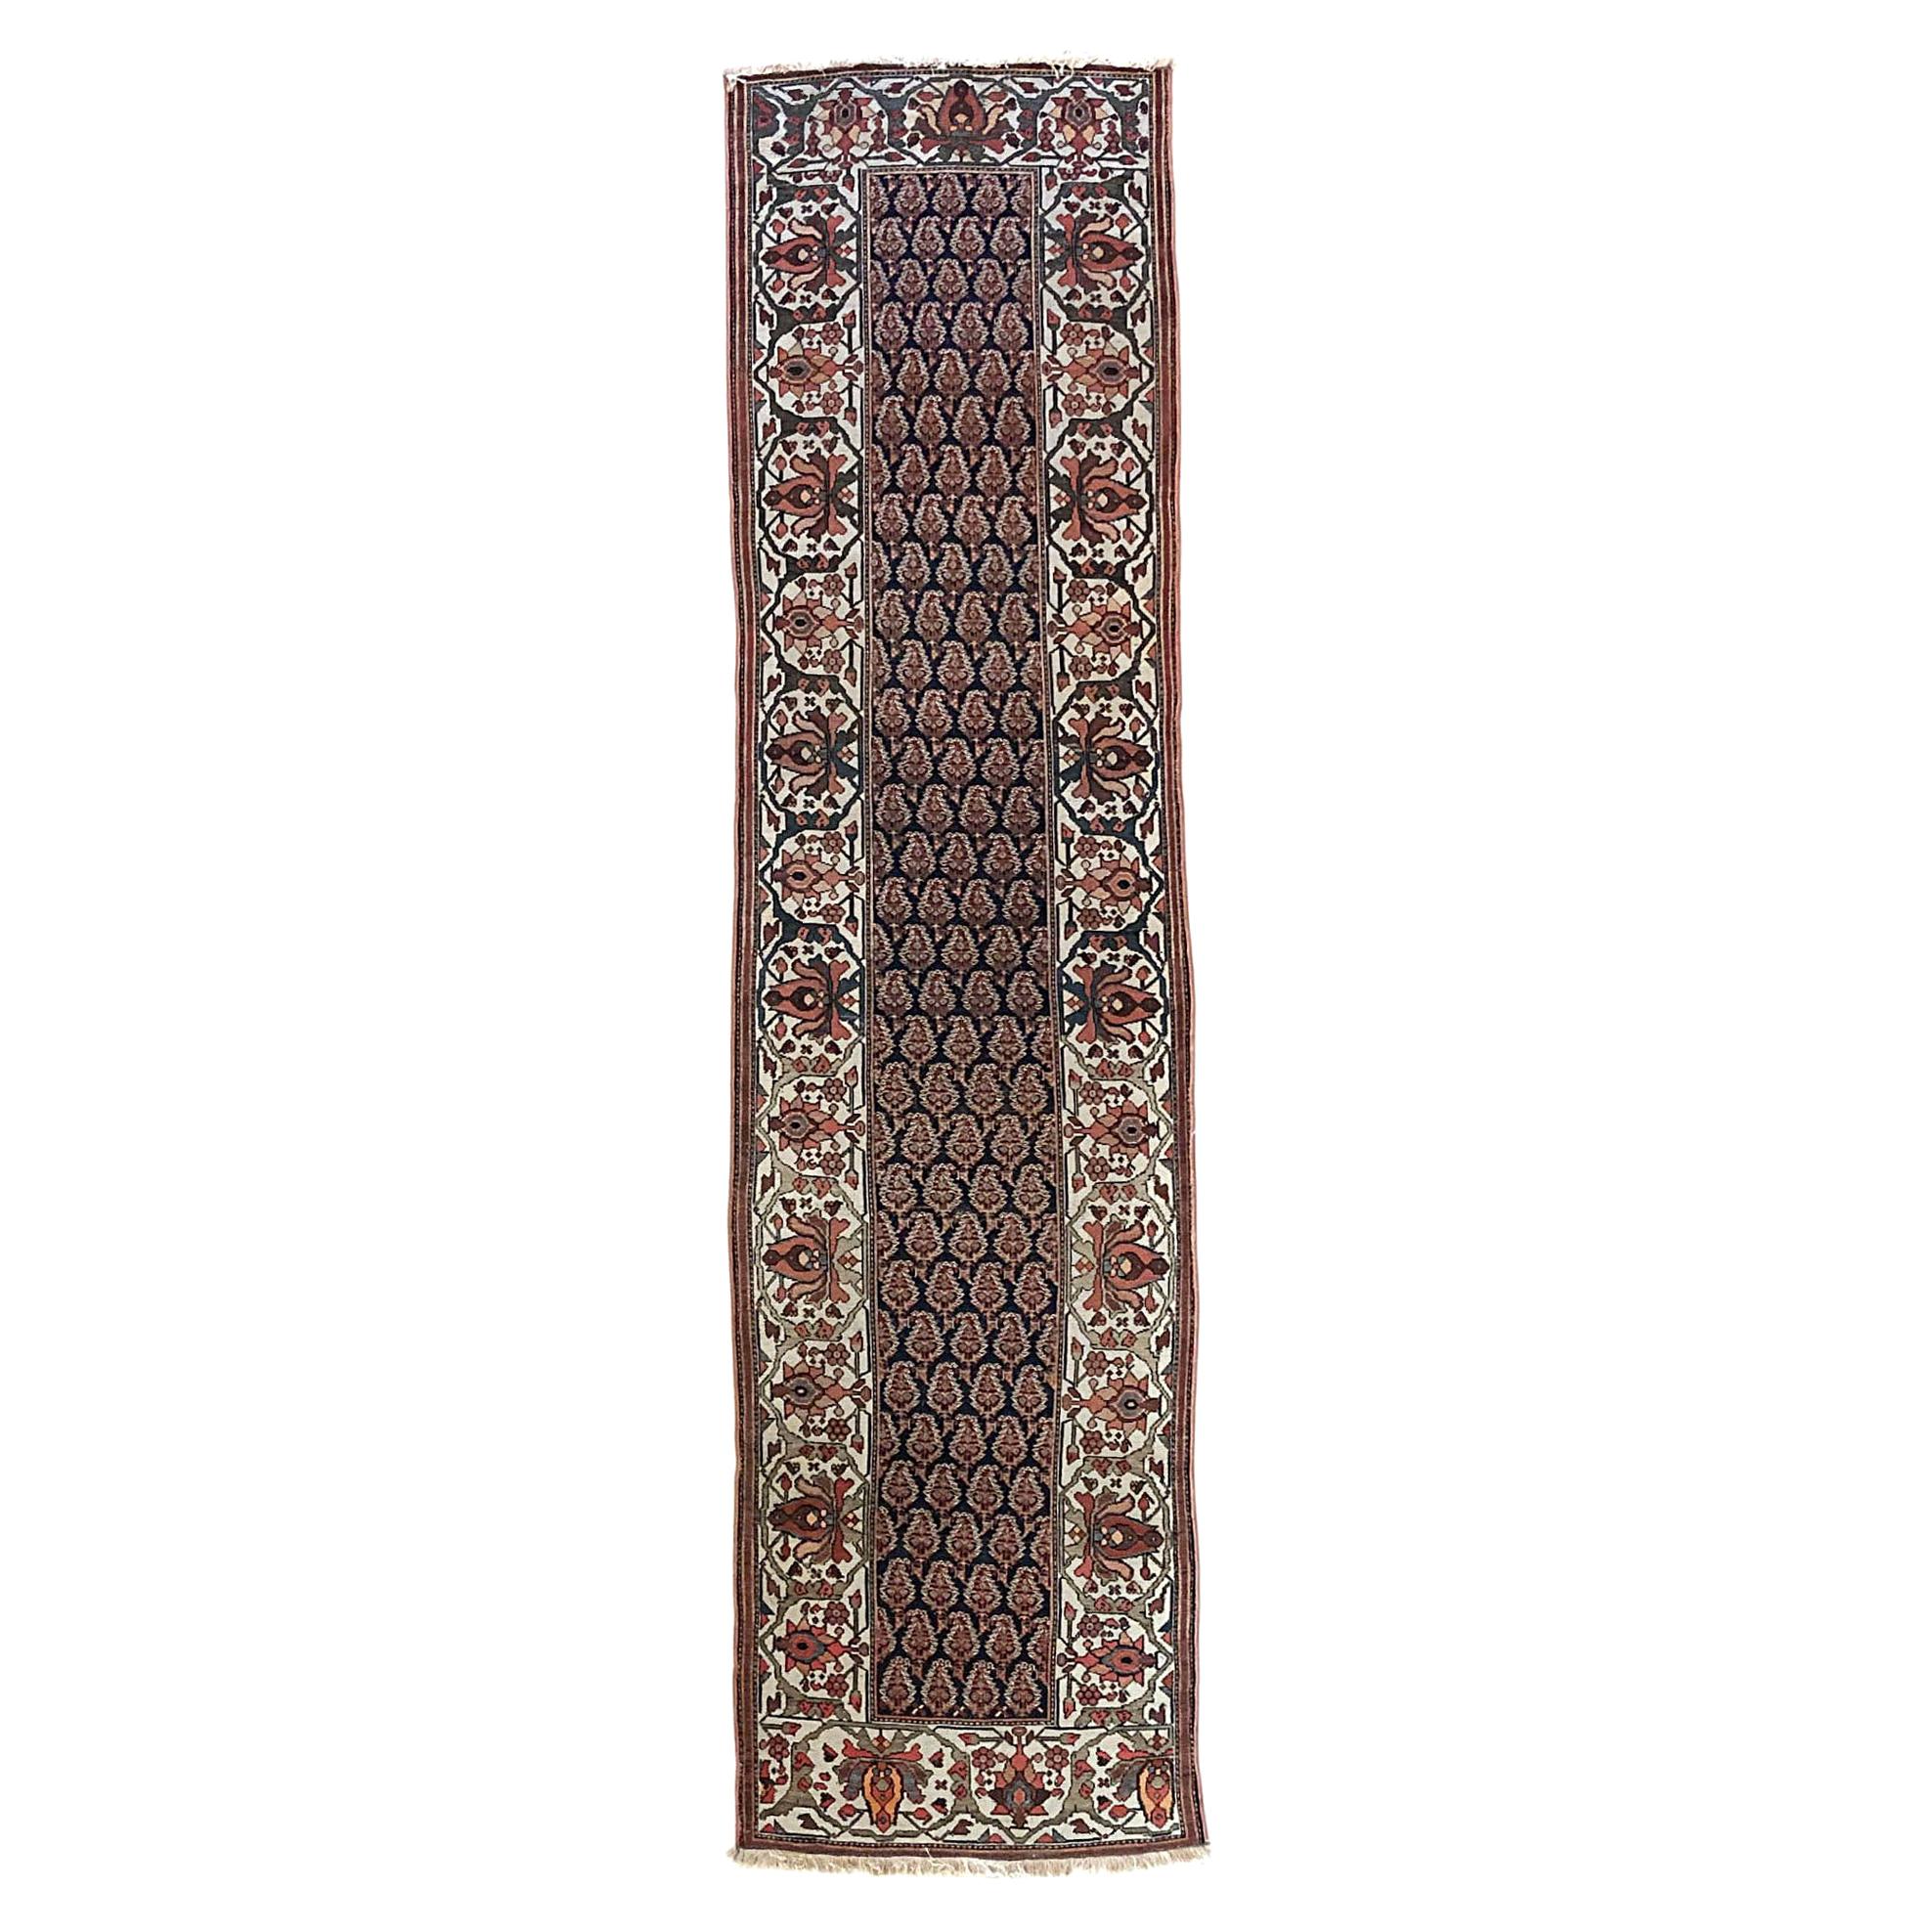 Authentic Persian Hand Knotted Antique Bakhtiari Rug, circa 1880 For Sale